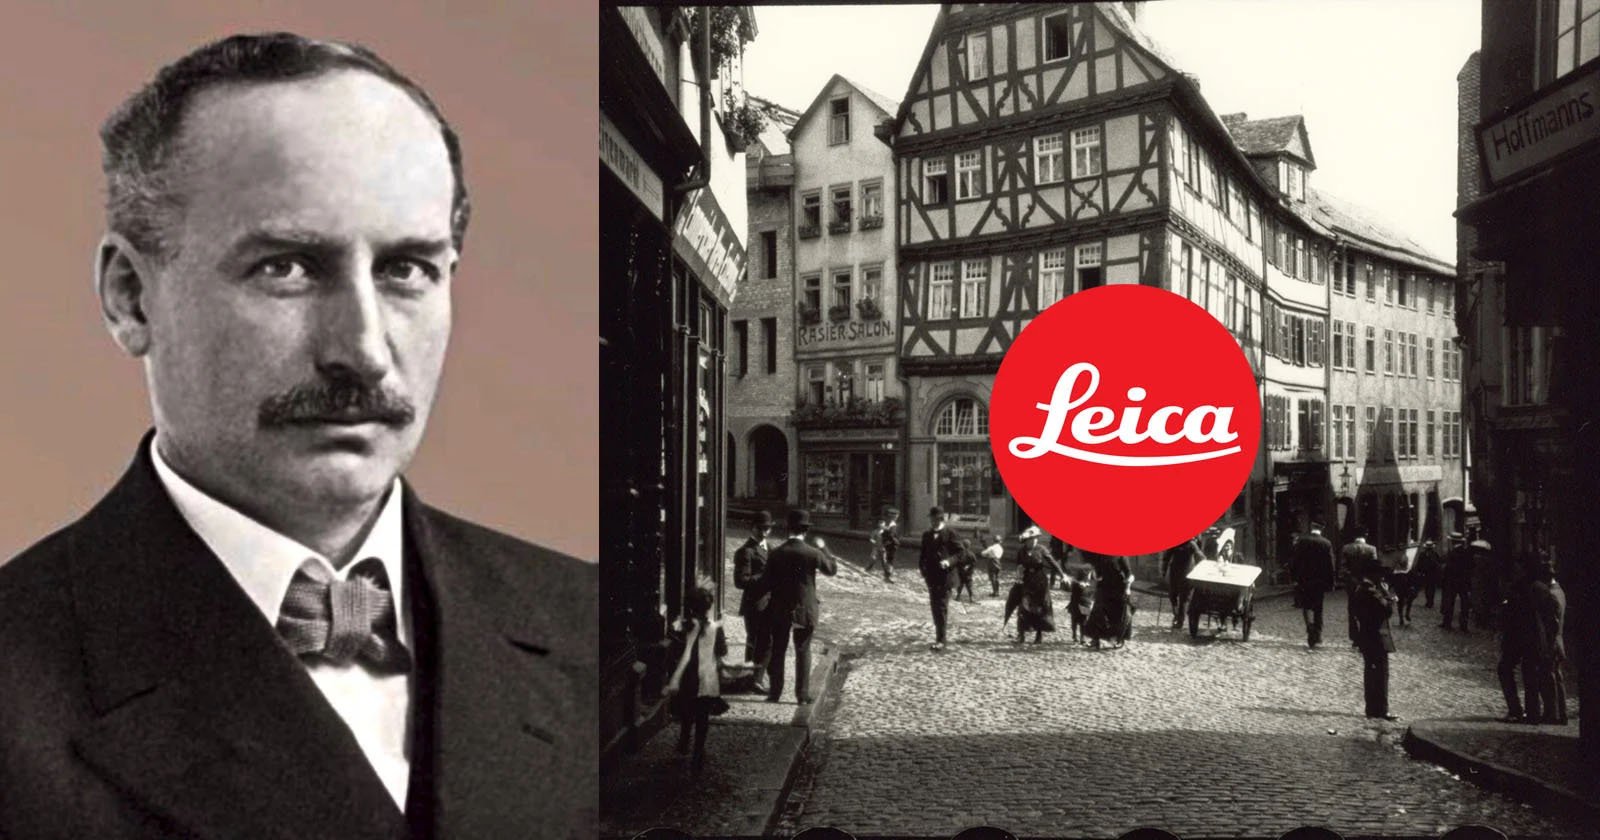 Upcoming Film Explores How Leica’s Founding Family Helped Jews in WWII